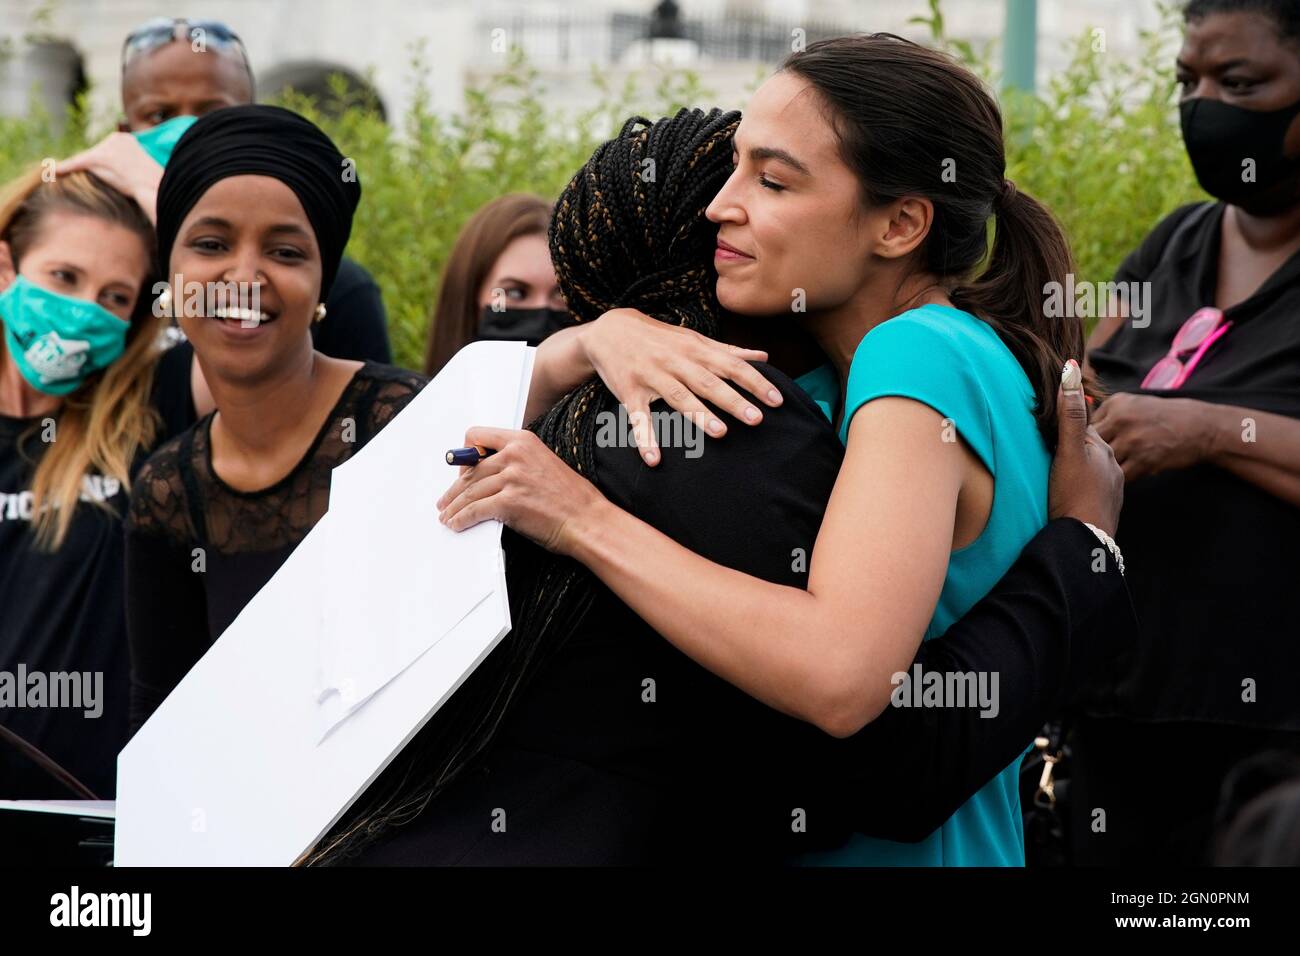 U.S. Representatives Cori Bush (D-MO) and Alexandria Ocasio-Cortez (D-NY)  embrace as U.S. Representative Ilhan Omar (D-MN) looks on before the start  of a news conference discussing the introduction of rent legislation outside